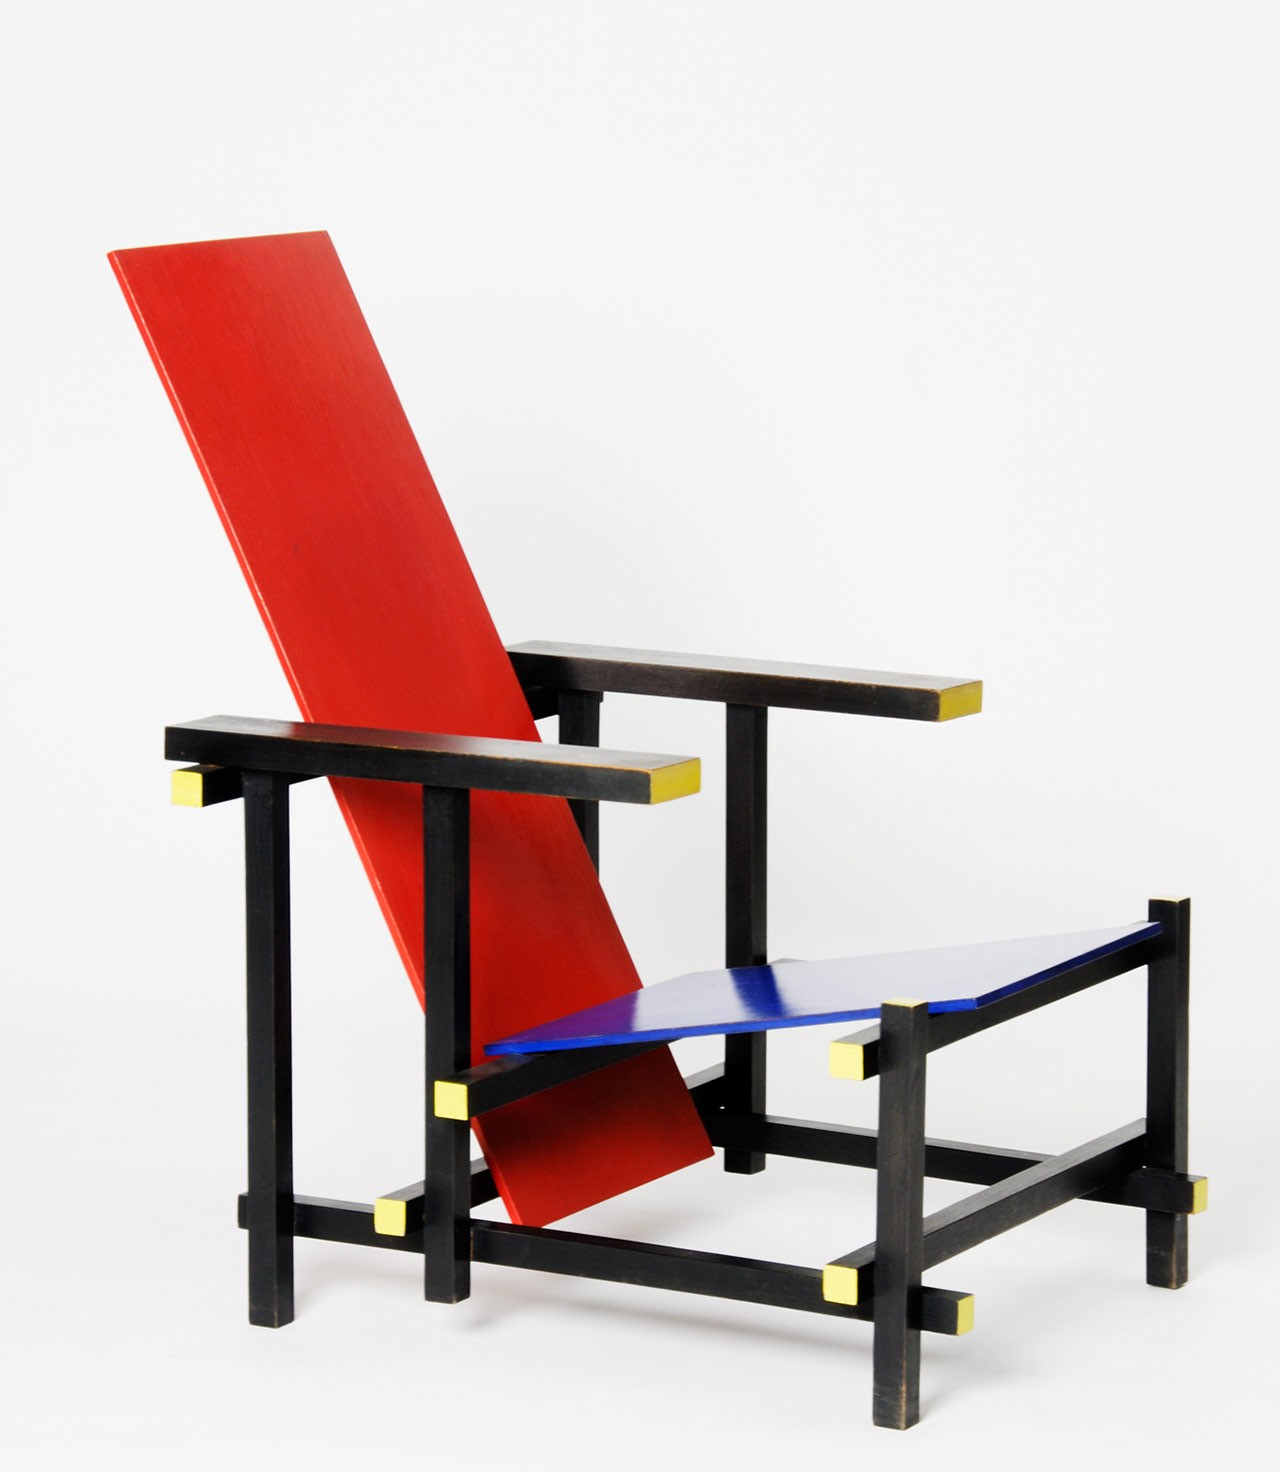 GERRIT RIETVELD: RED AND BLUE CHAIR